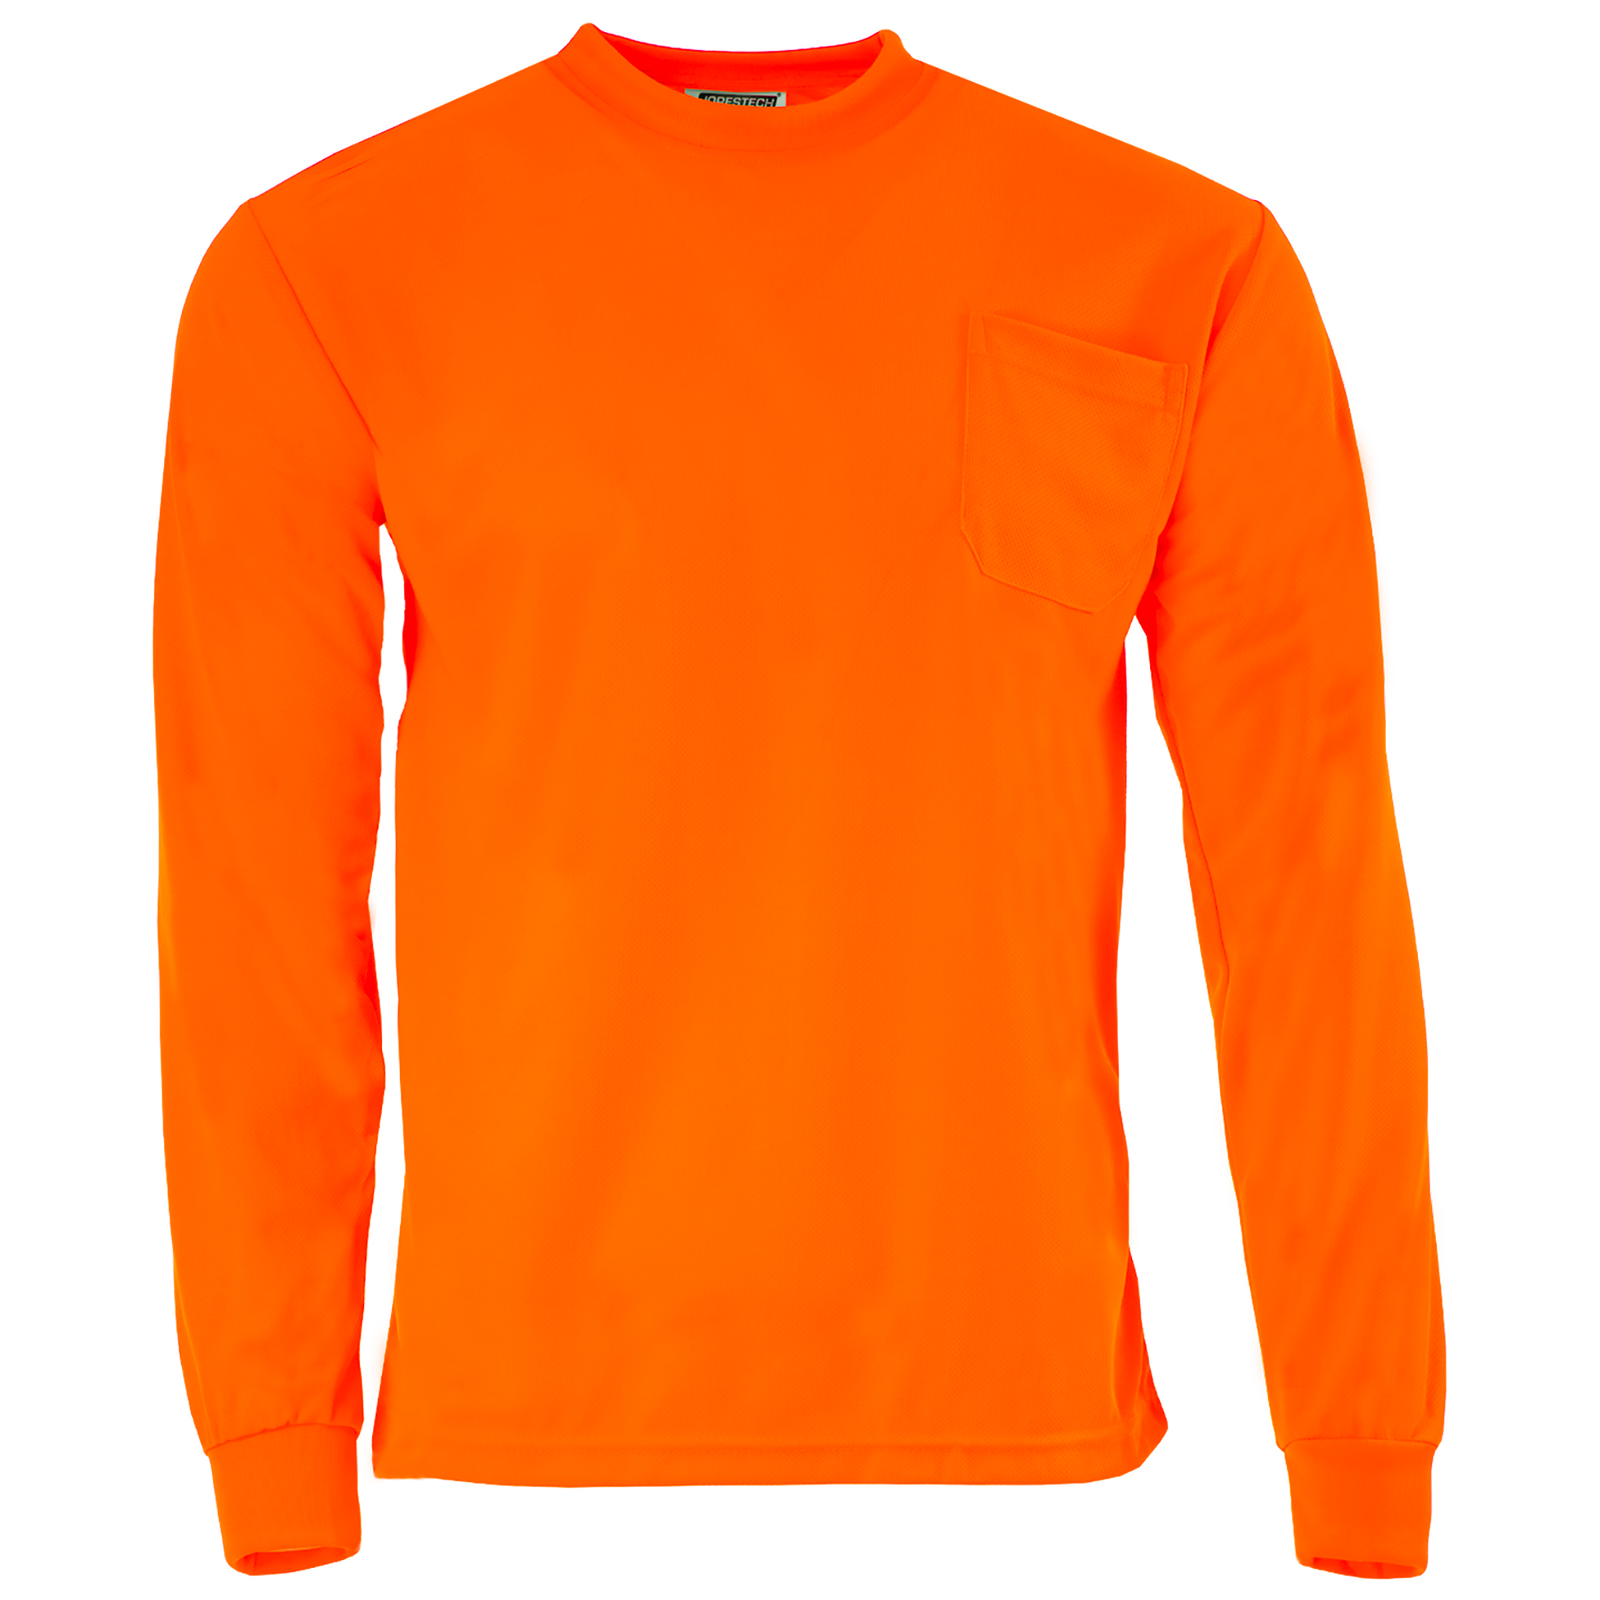 Front view of the Hi-vis safety long sleeve orange shirts